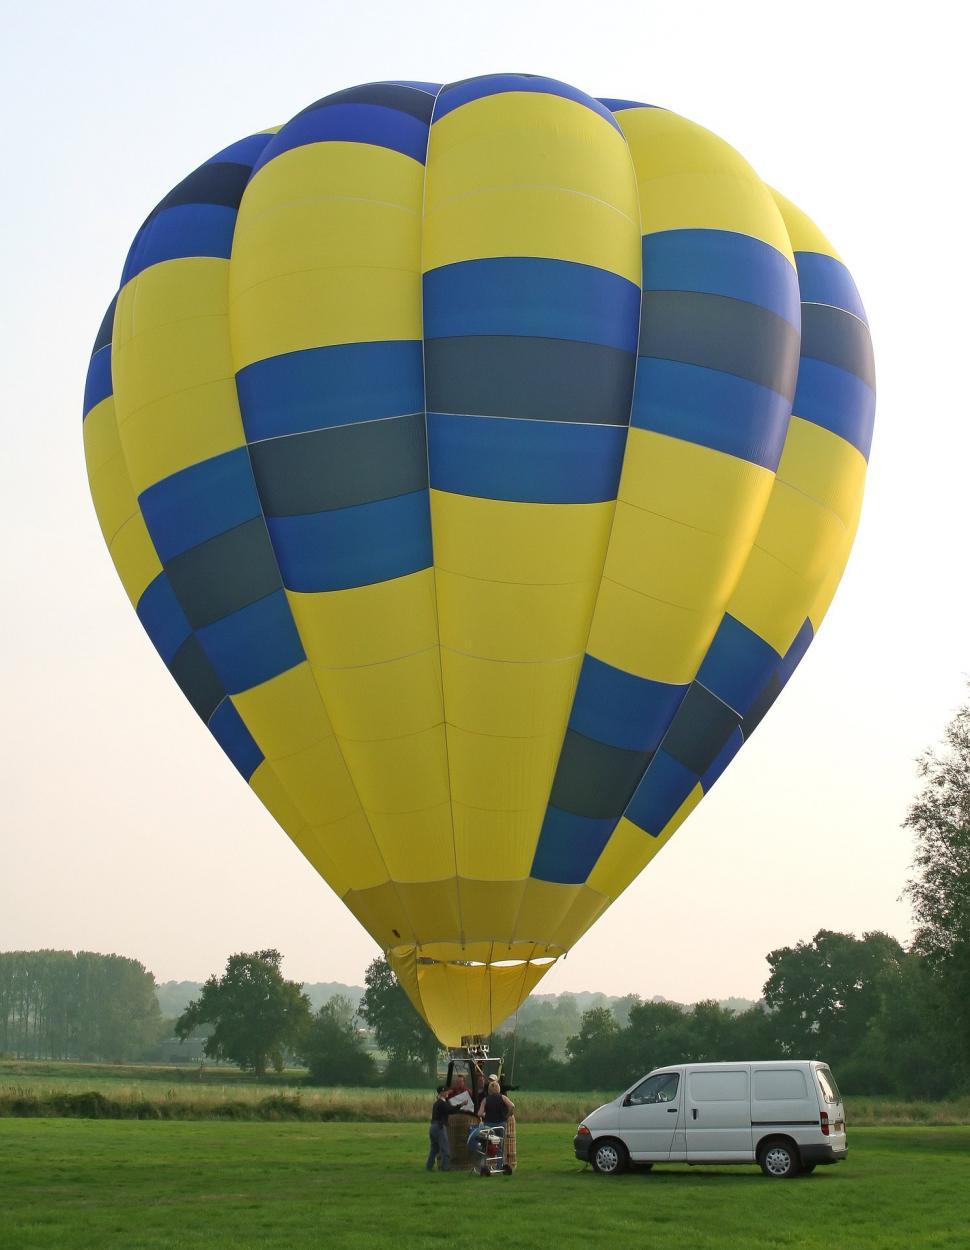 Free Image of Large Yellow and Blue Hot Air Balloon 